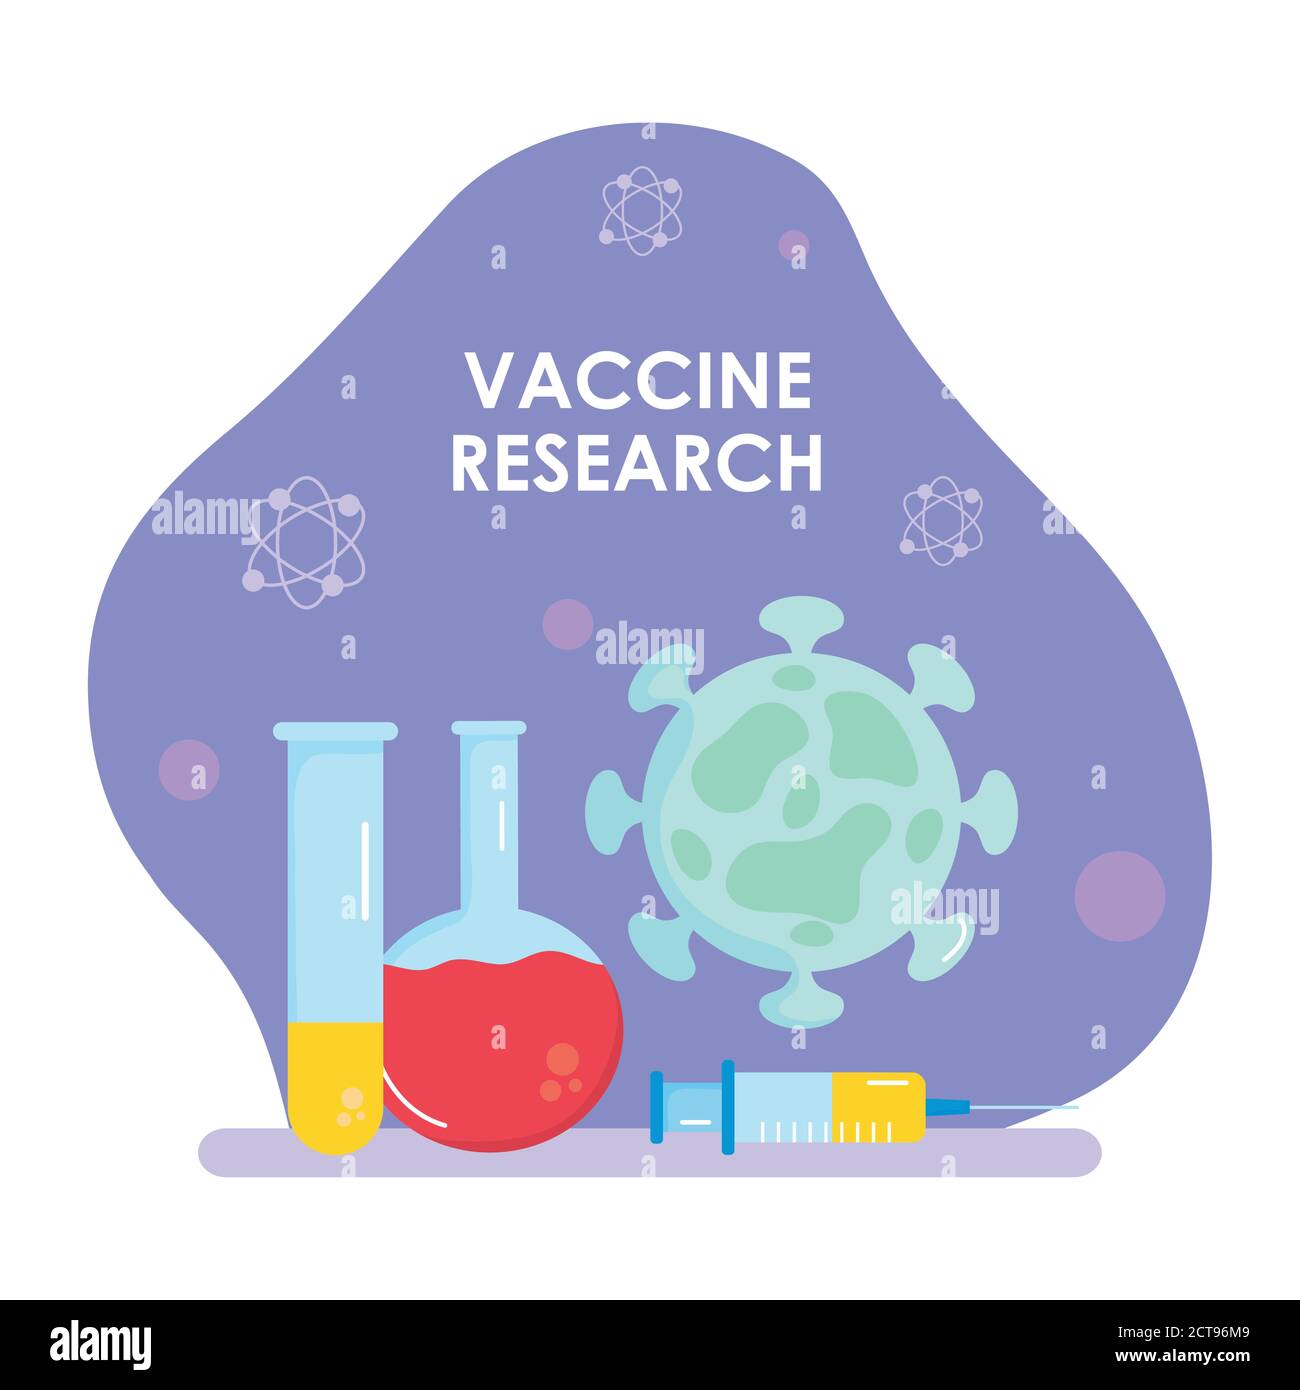 Vaccine research design with chemical flask, test tubes and virus icon over purple background, colorful design, vecotr illustration Stock Vector